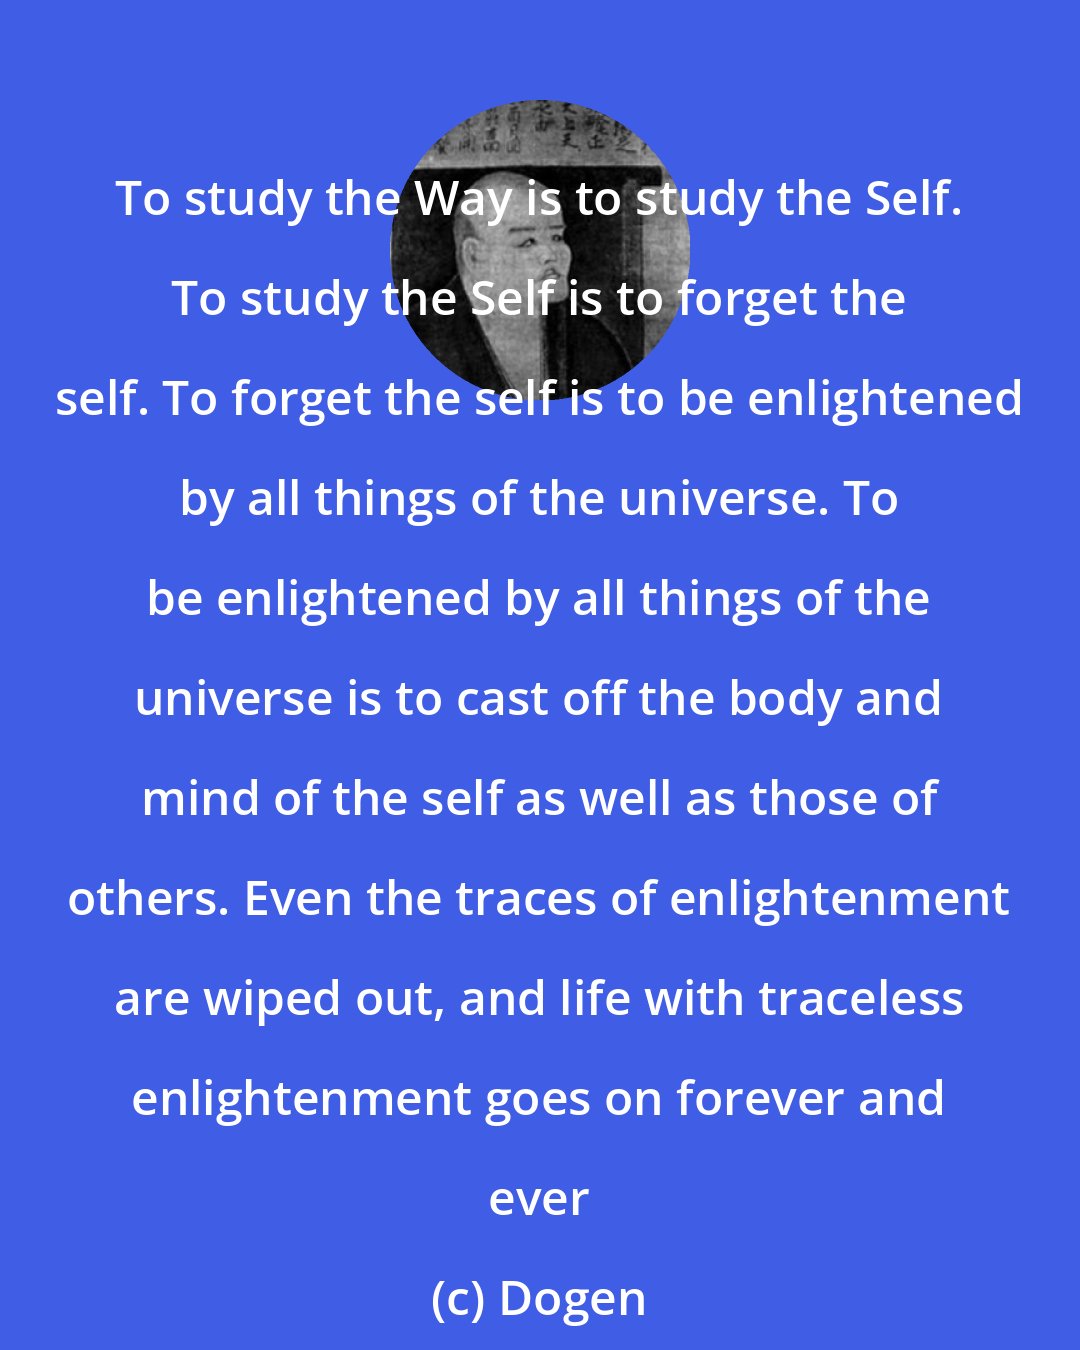 Dogen: To study the Way is to study the Self. To study the Self is to forget the self. To forget the self is to be enlightened by all things of the universe. To be enlightened by all things of the universe is to cast off the body and mind of the self as well as those of others. Even the traces of enlightenment are wiped out, and life with traceless enlightenment goes on forever and ever